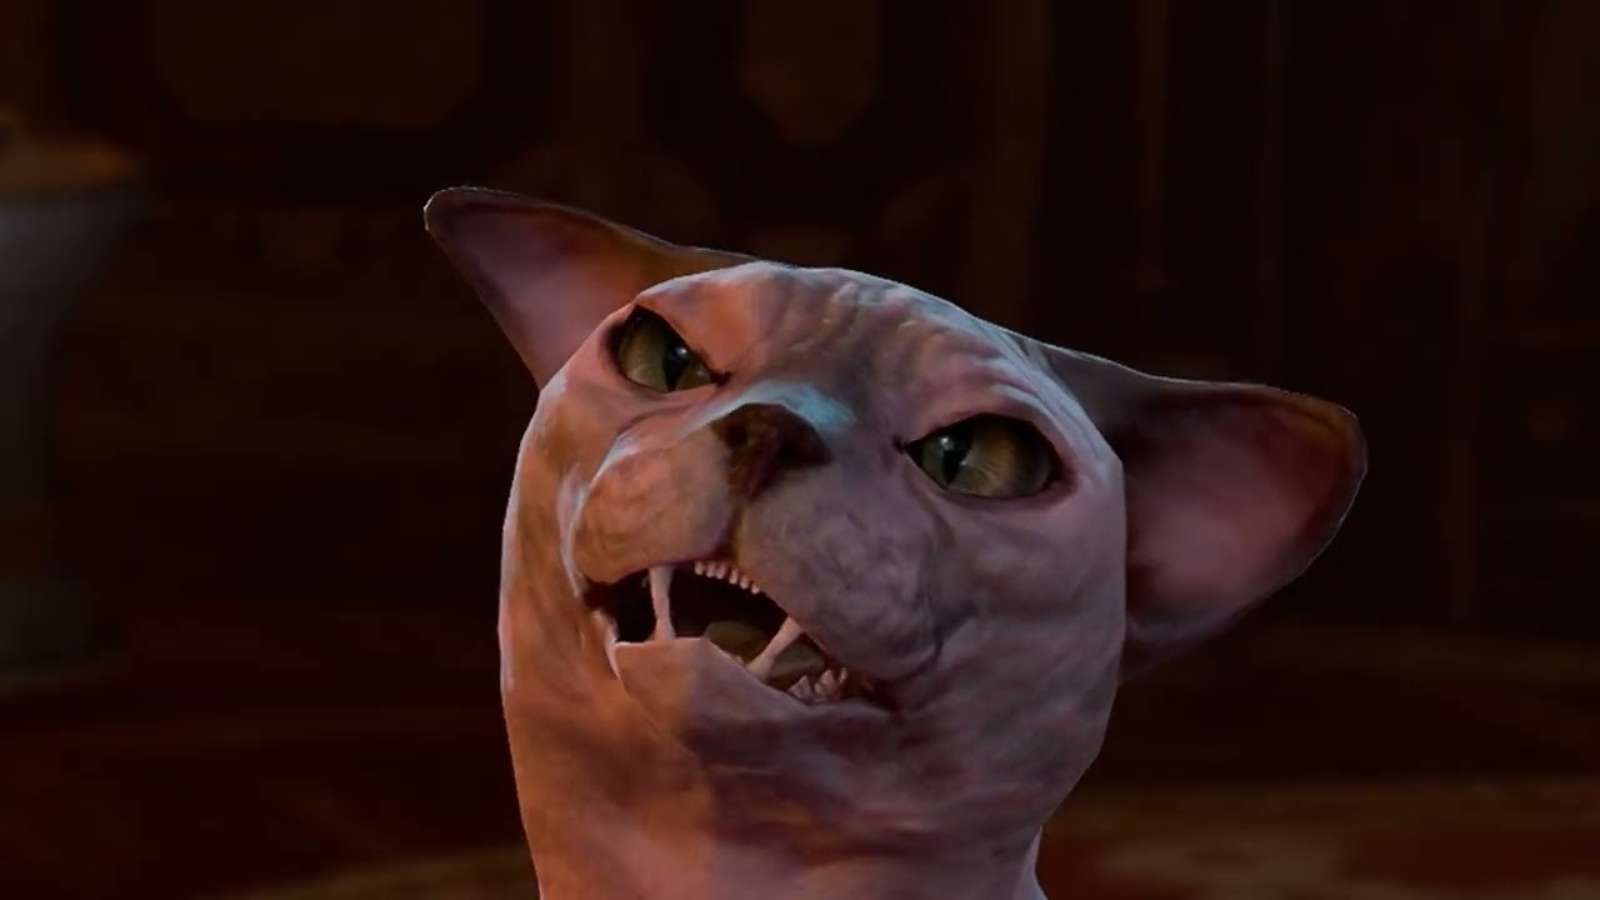 His Majesty the cat looking angry in Baldur's Gate 3